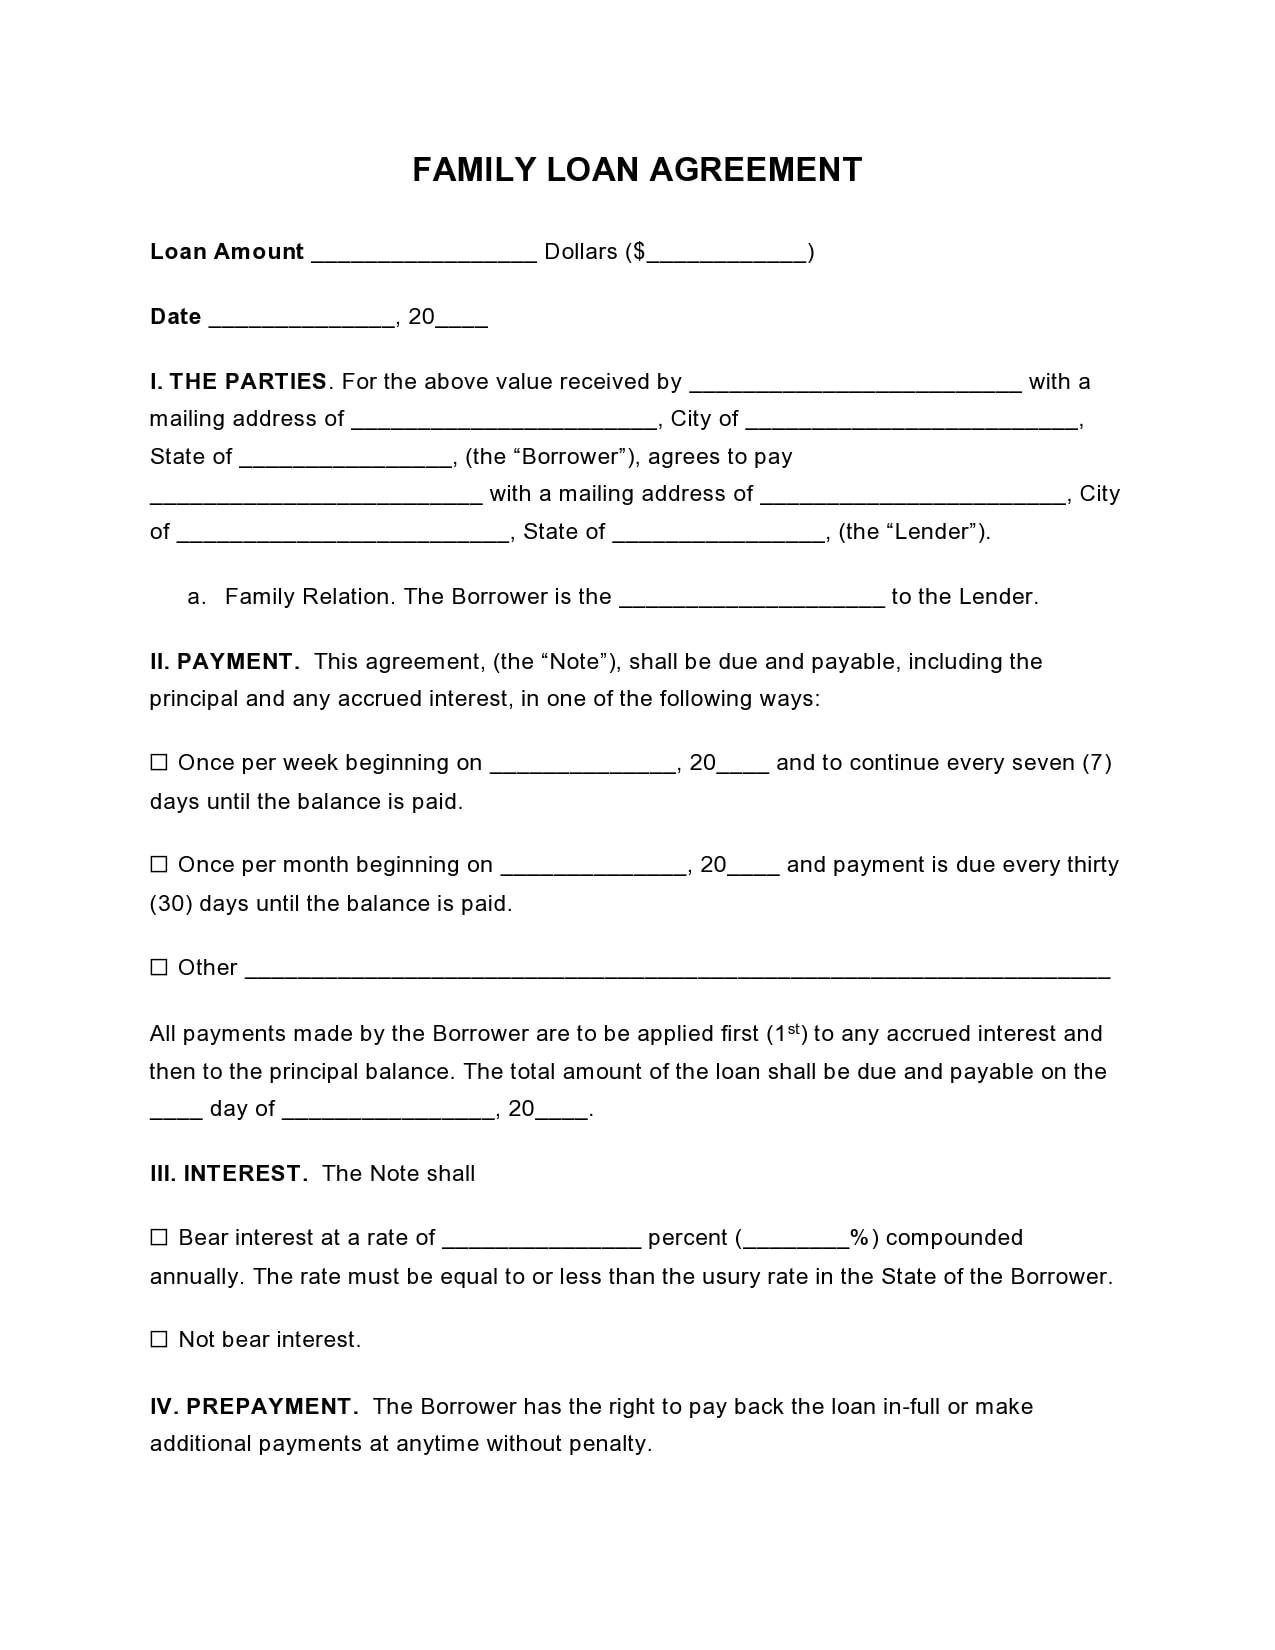 23 Simple Family Loan Agreement Templates (23% Free) For Mortgage Note Template